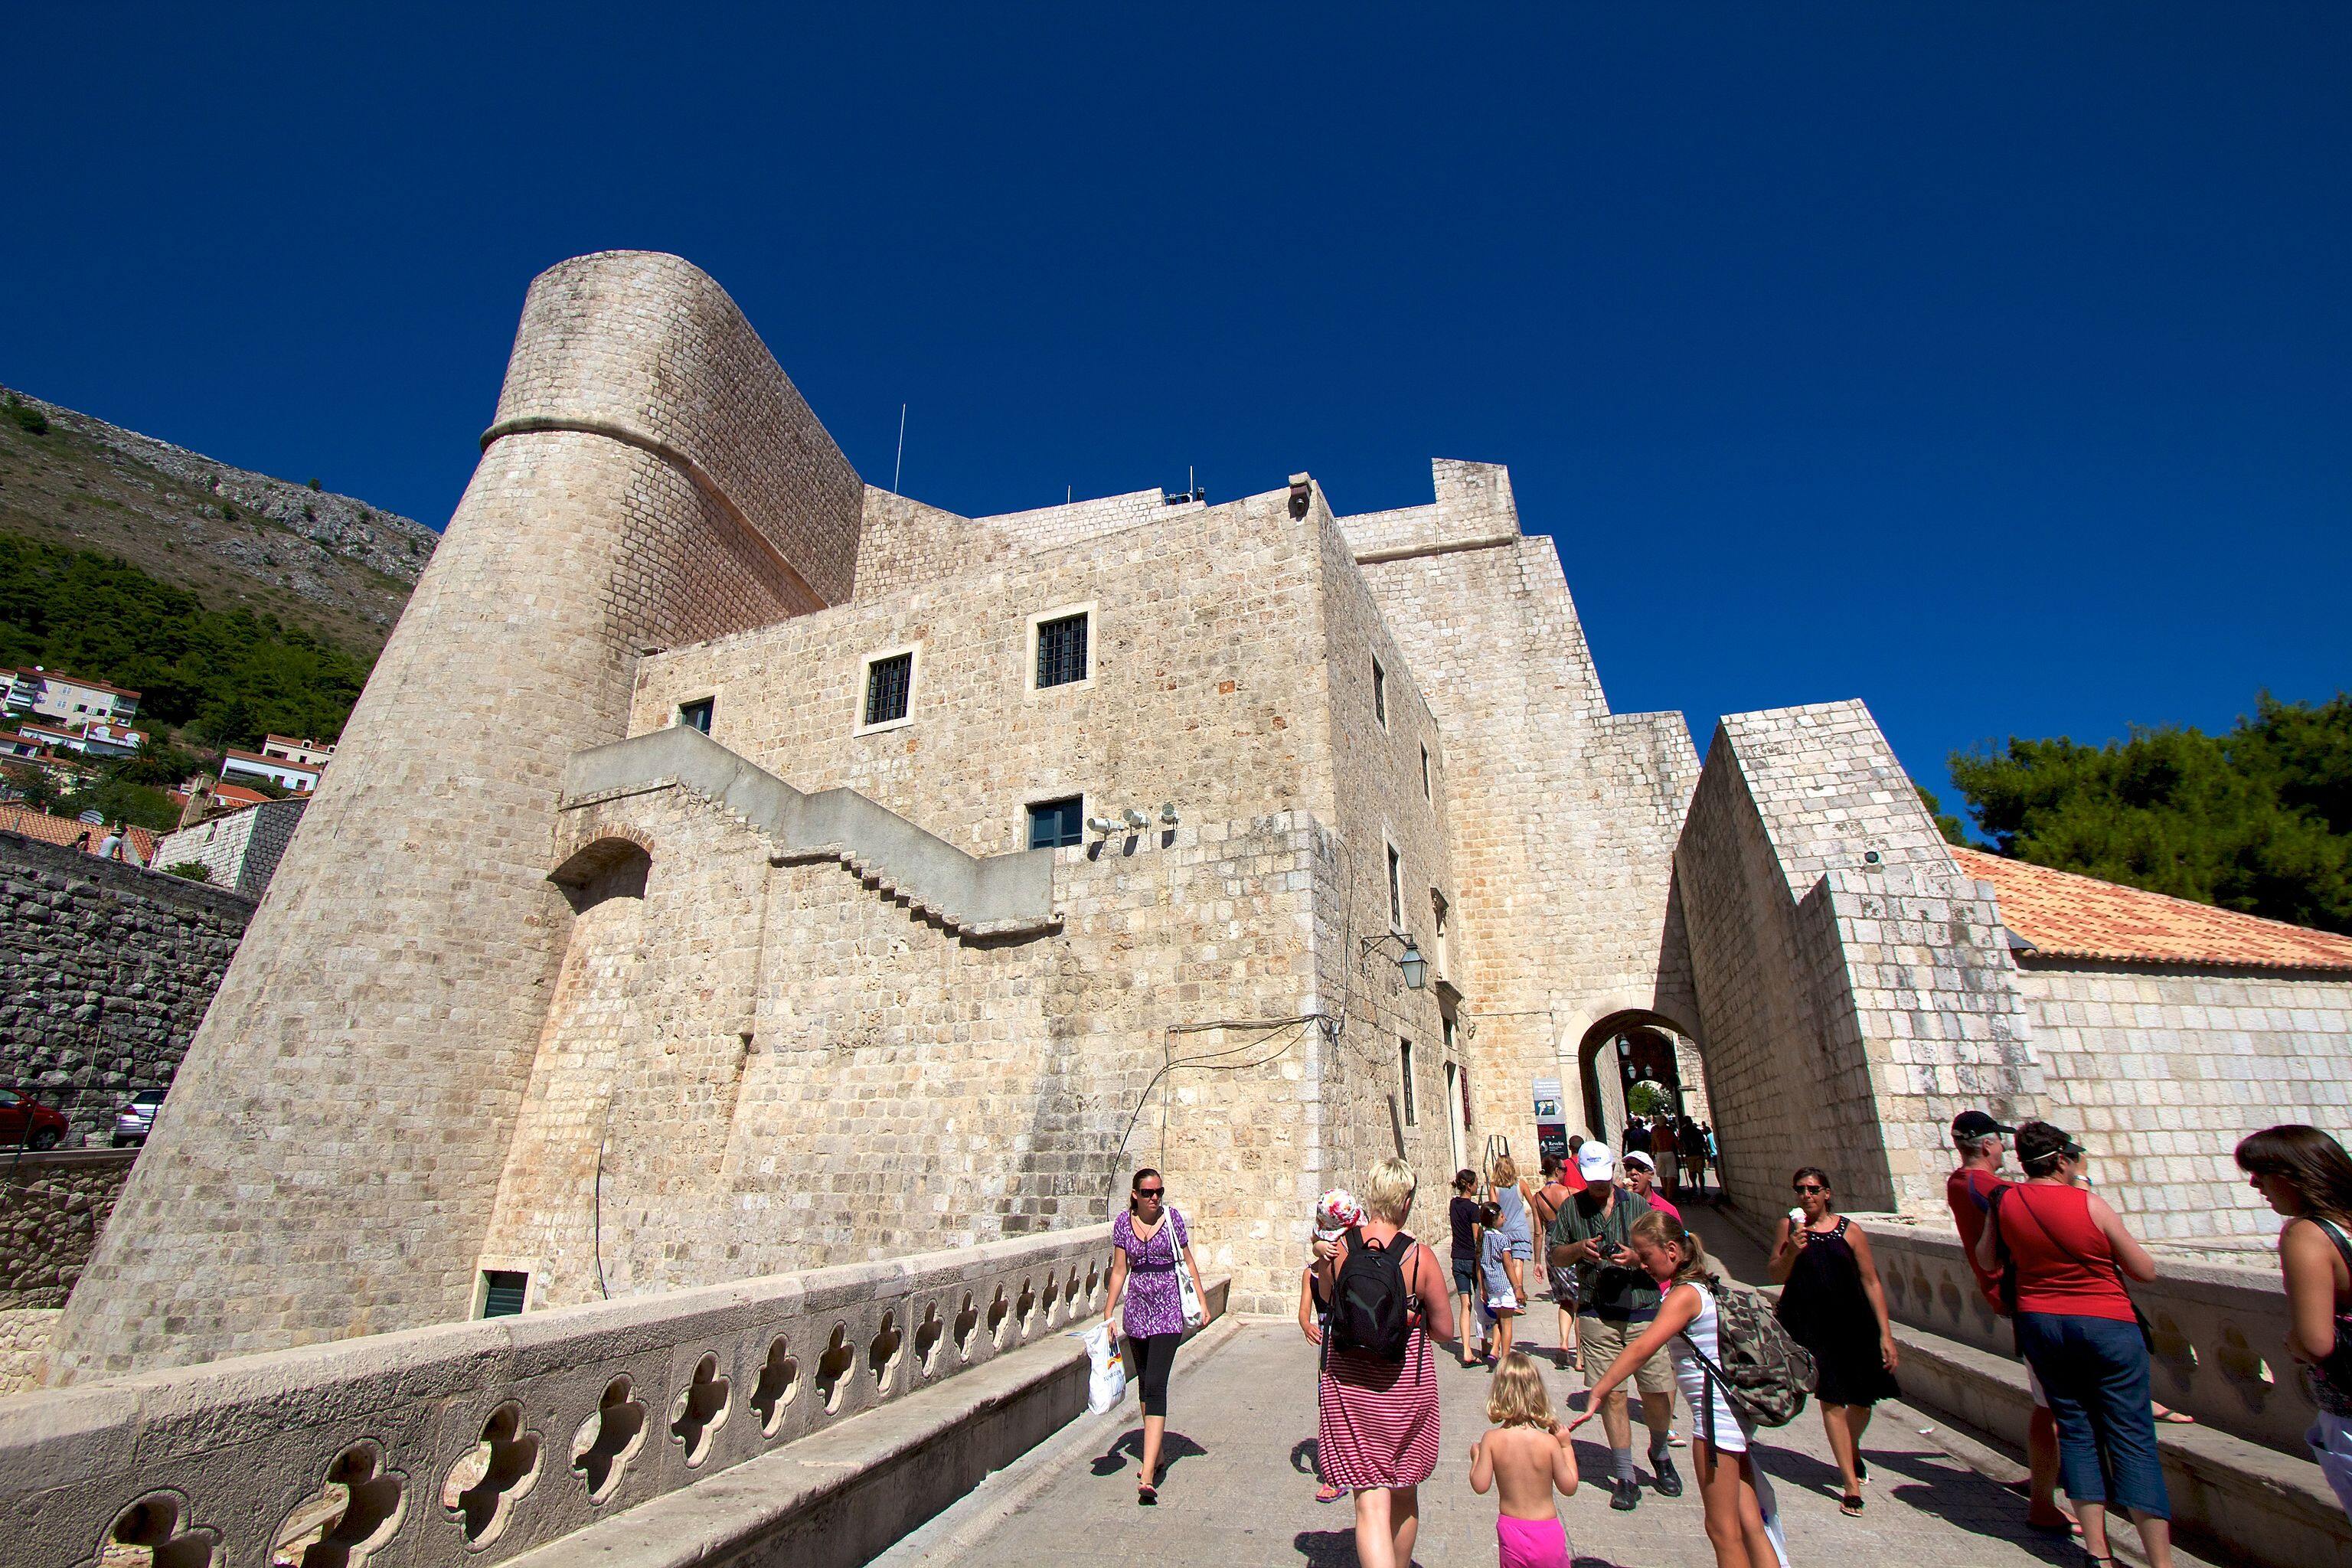 The entrance to the fort Revelin, Dubrovnik.